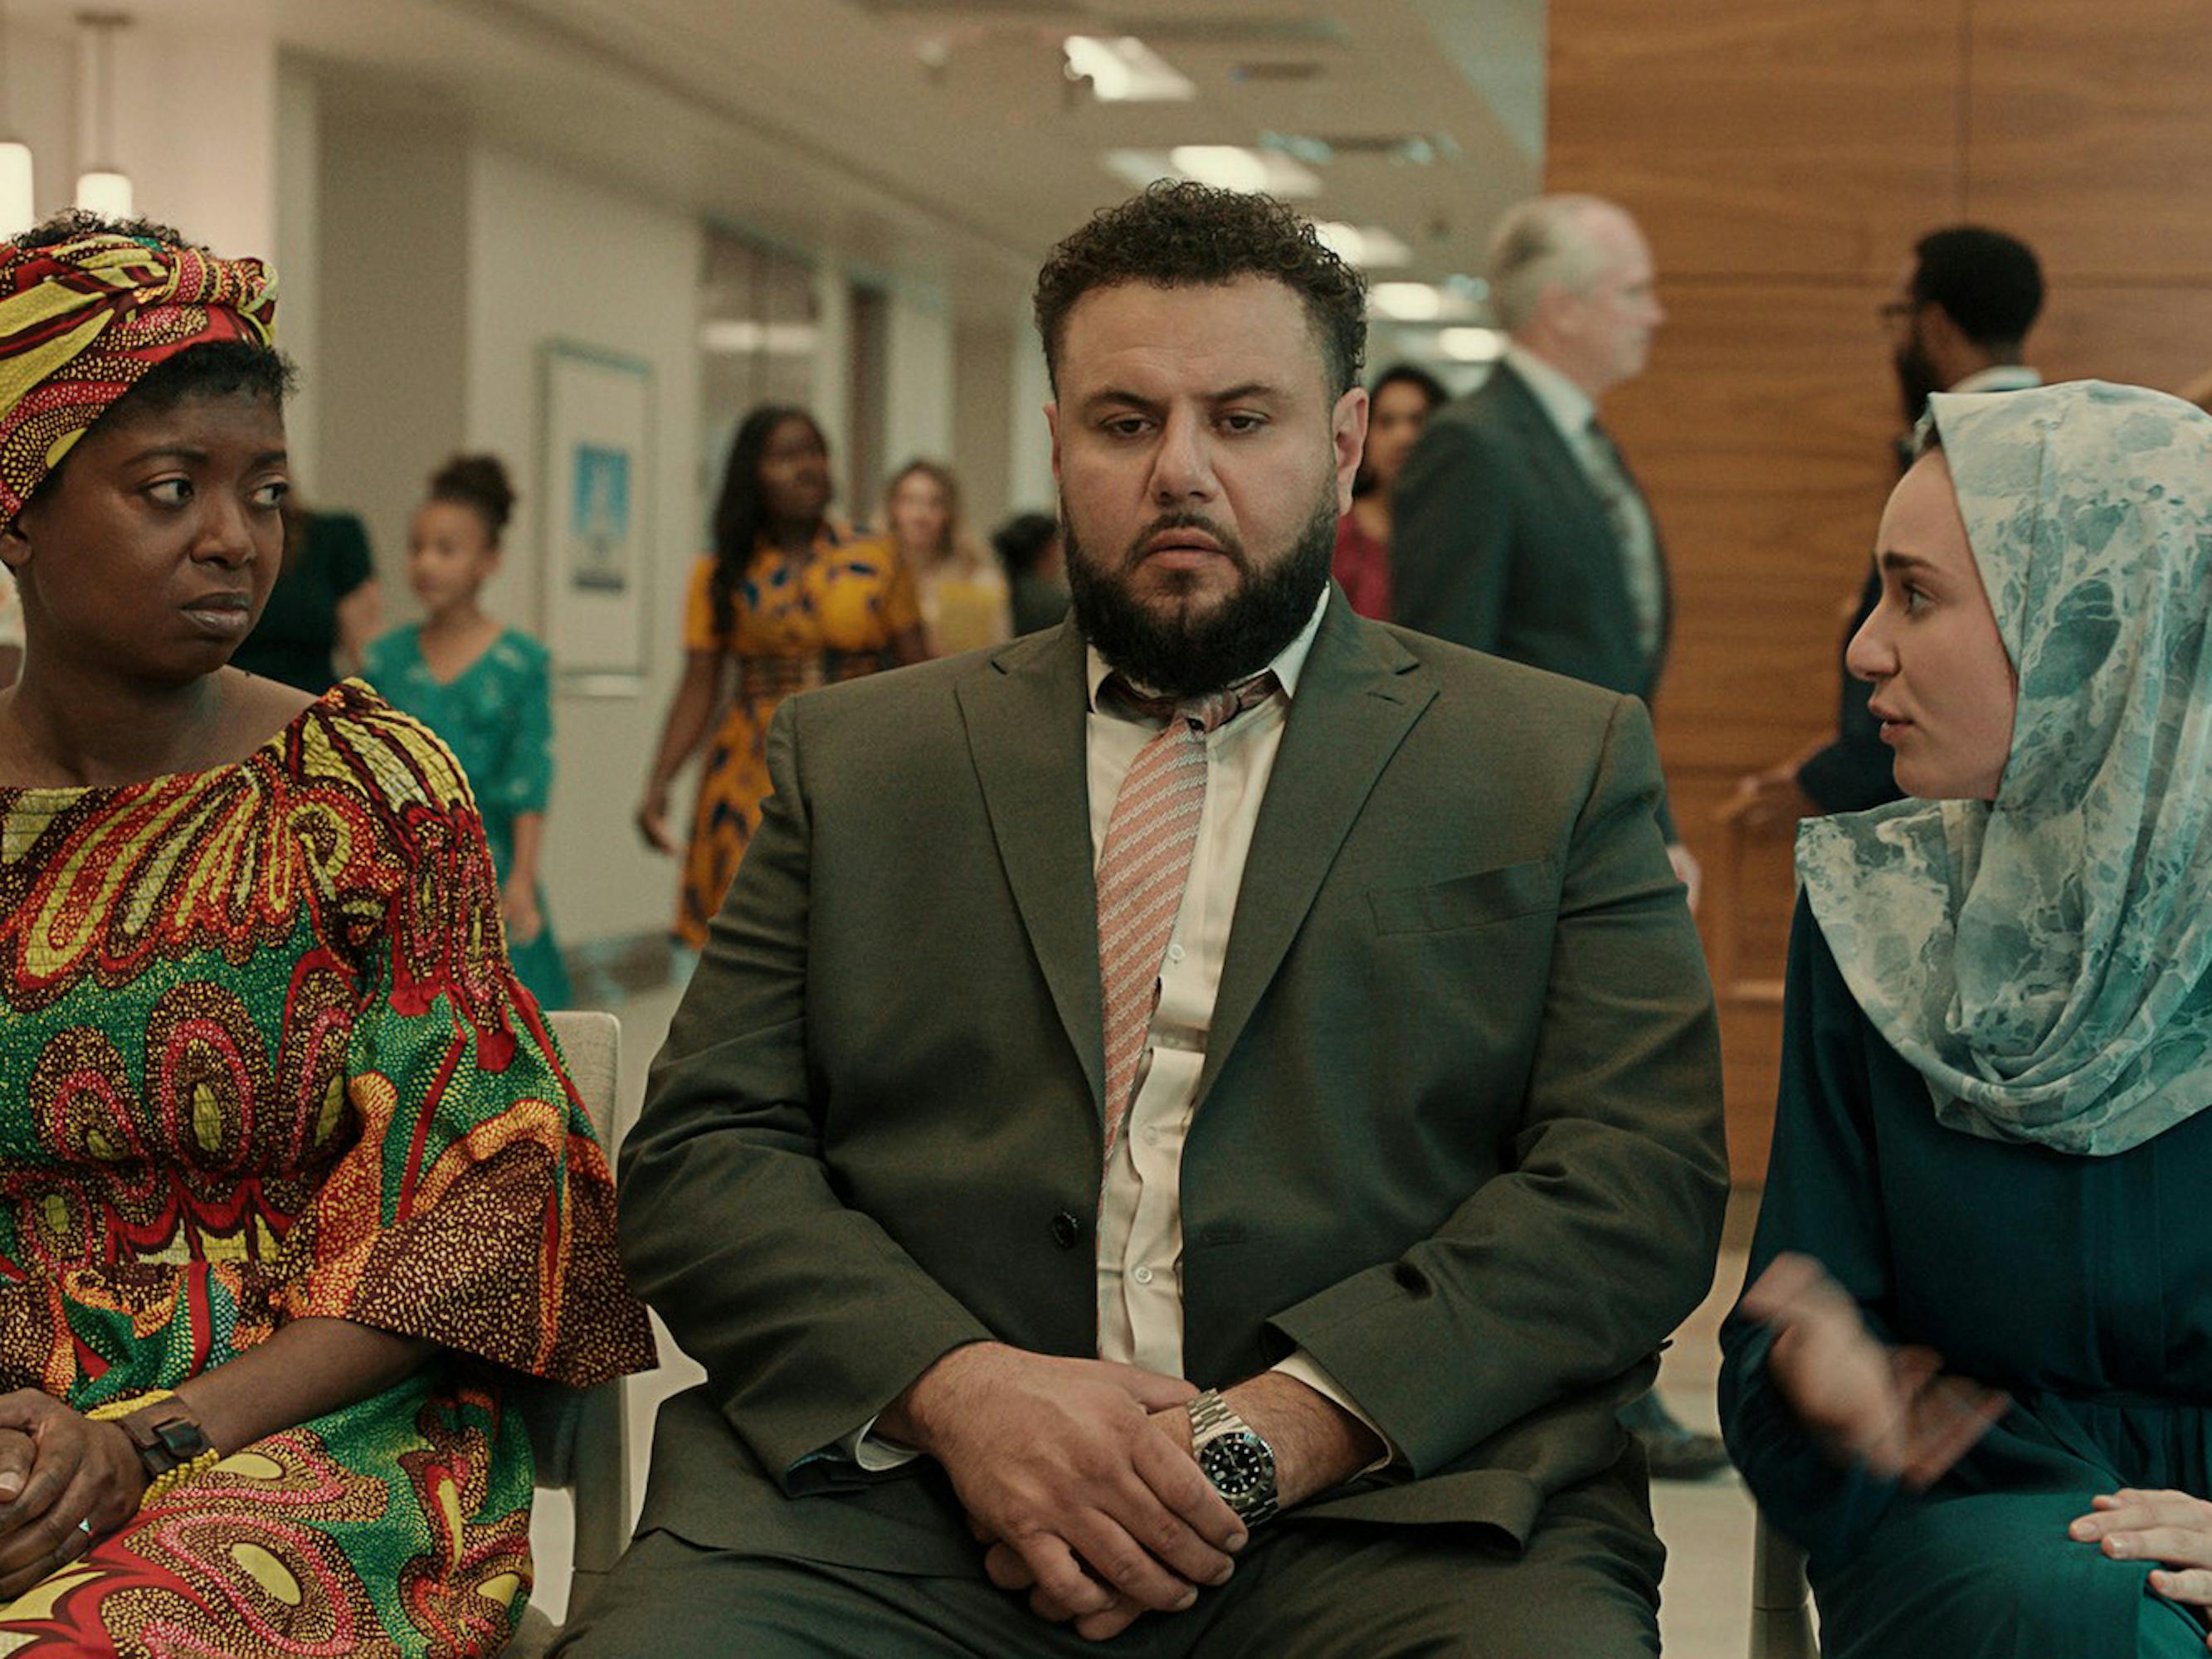 Aisha (Nene Nwoko), Mo (Mo Amer), and Maysoon (Zein Khleif) sit together. Aisha wears a matching scarf and dress, Mo wears a suit, and Maysoon wears a teal top and patterned scarf.